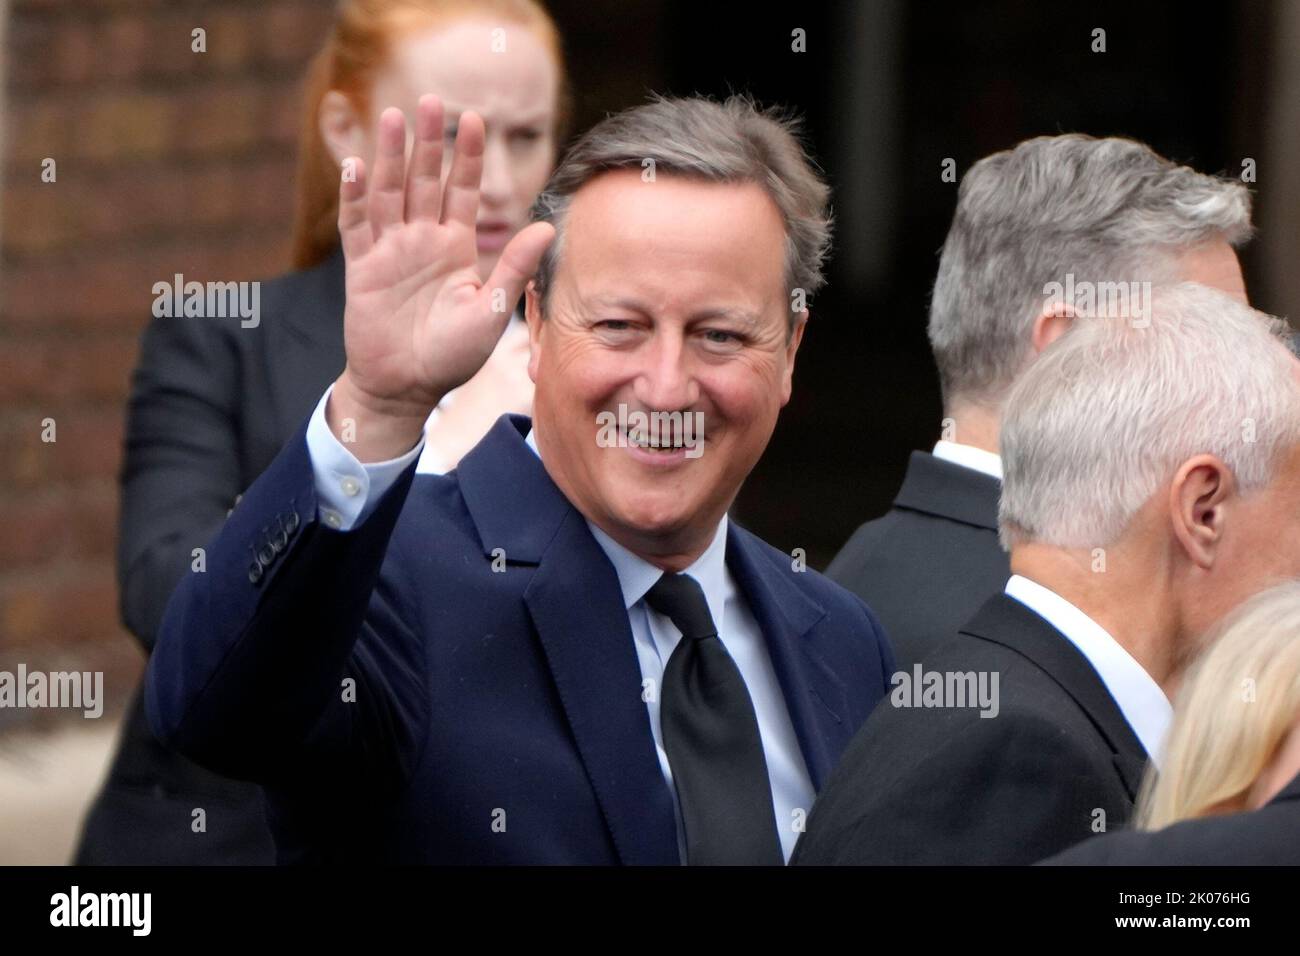 Former prime minister David Cameron leaving the Accession Council ceremony at St James's Palace, London, where King Charles III is formally proclaimed monarch. Charles automatically became King on the death of his mother, but the Accession Council, attended by Privy Councillors, confirms his role. Picture date: Saturday September 10, 2022. Stock Photo